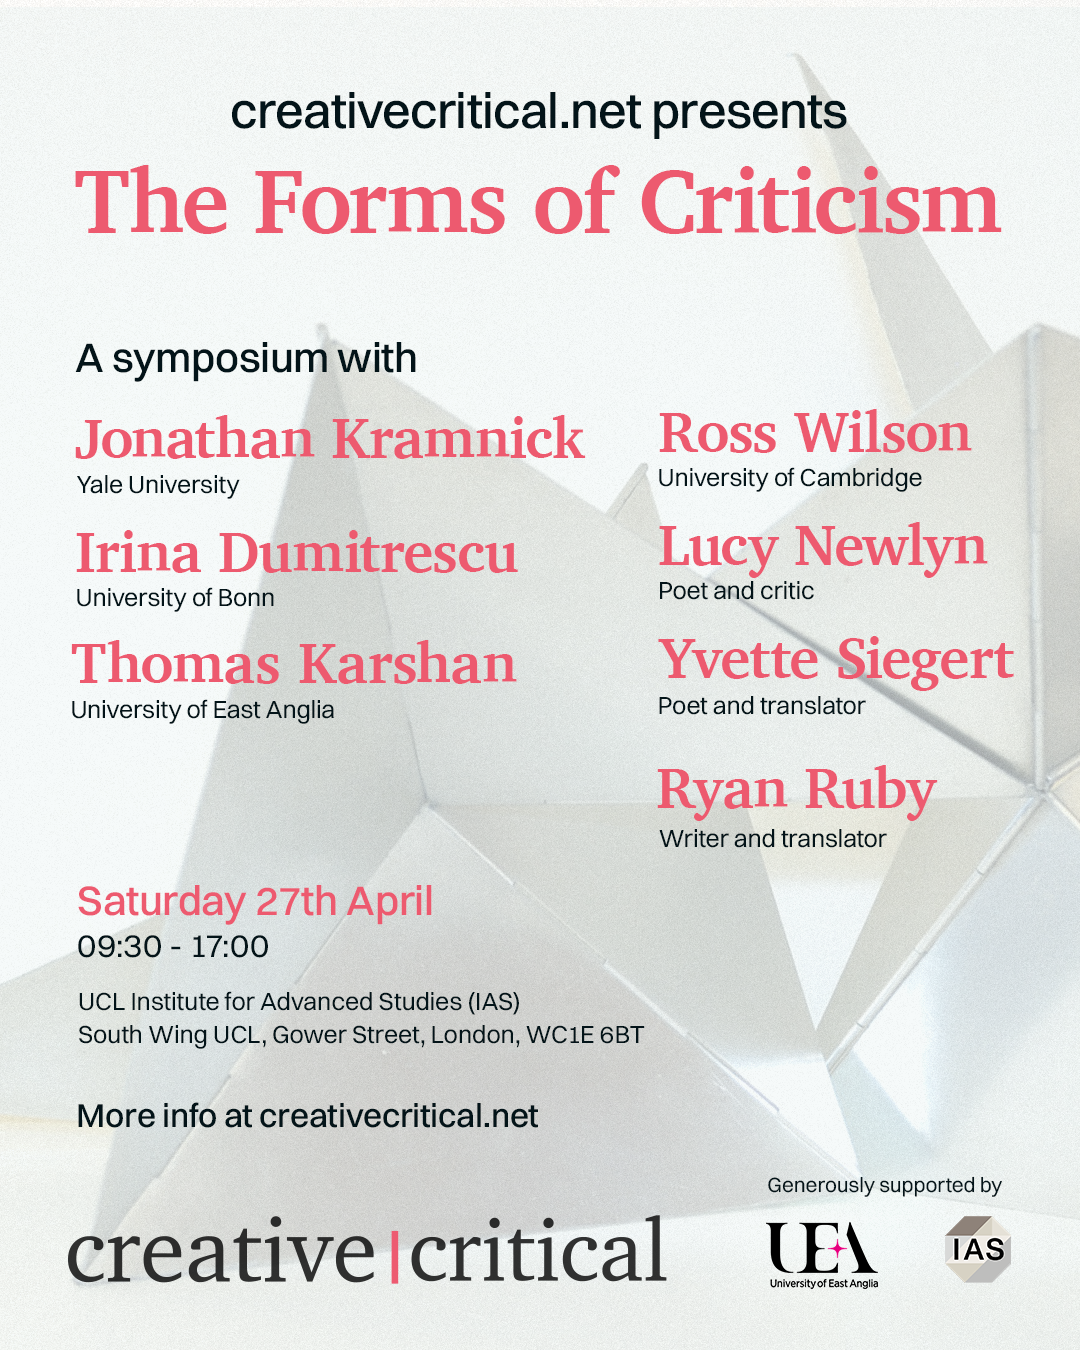 The Forms of Criticism, A Symposium